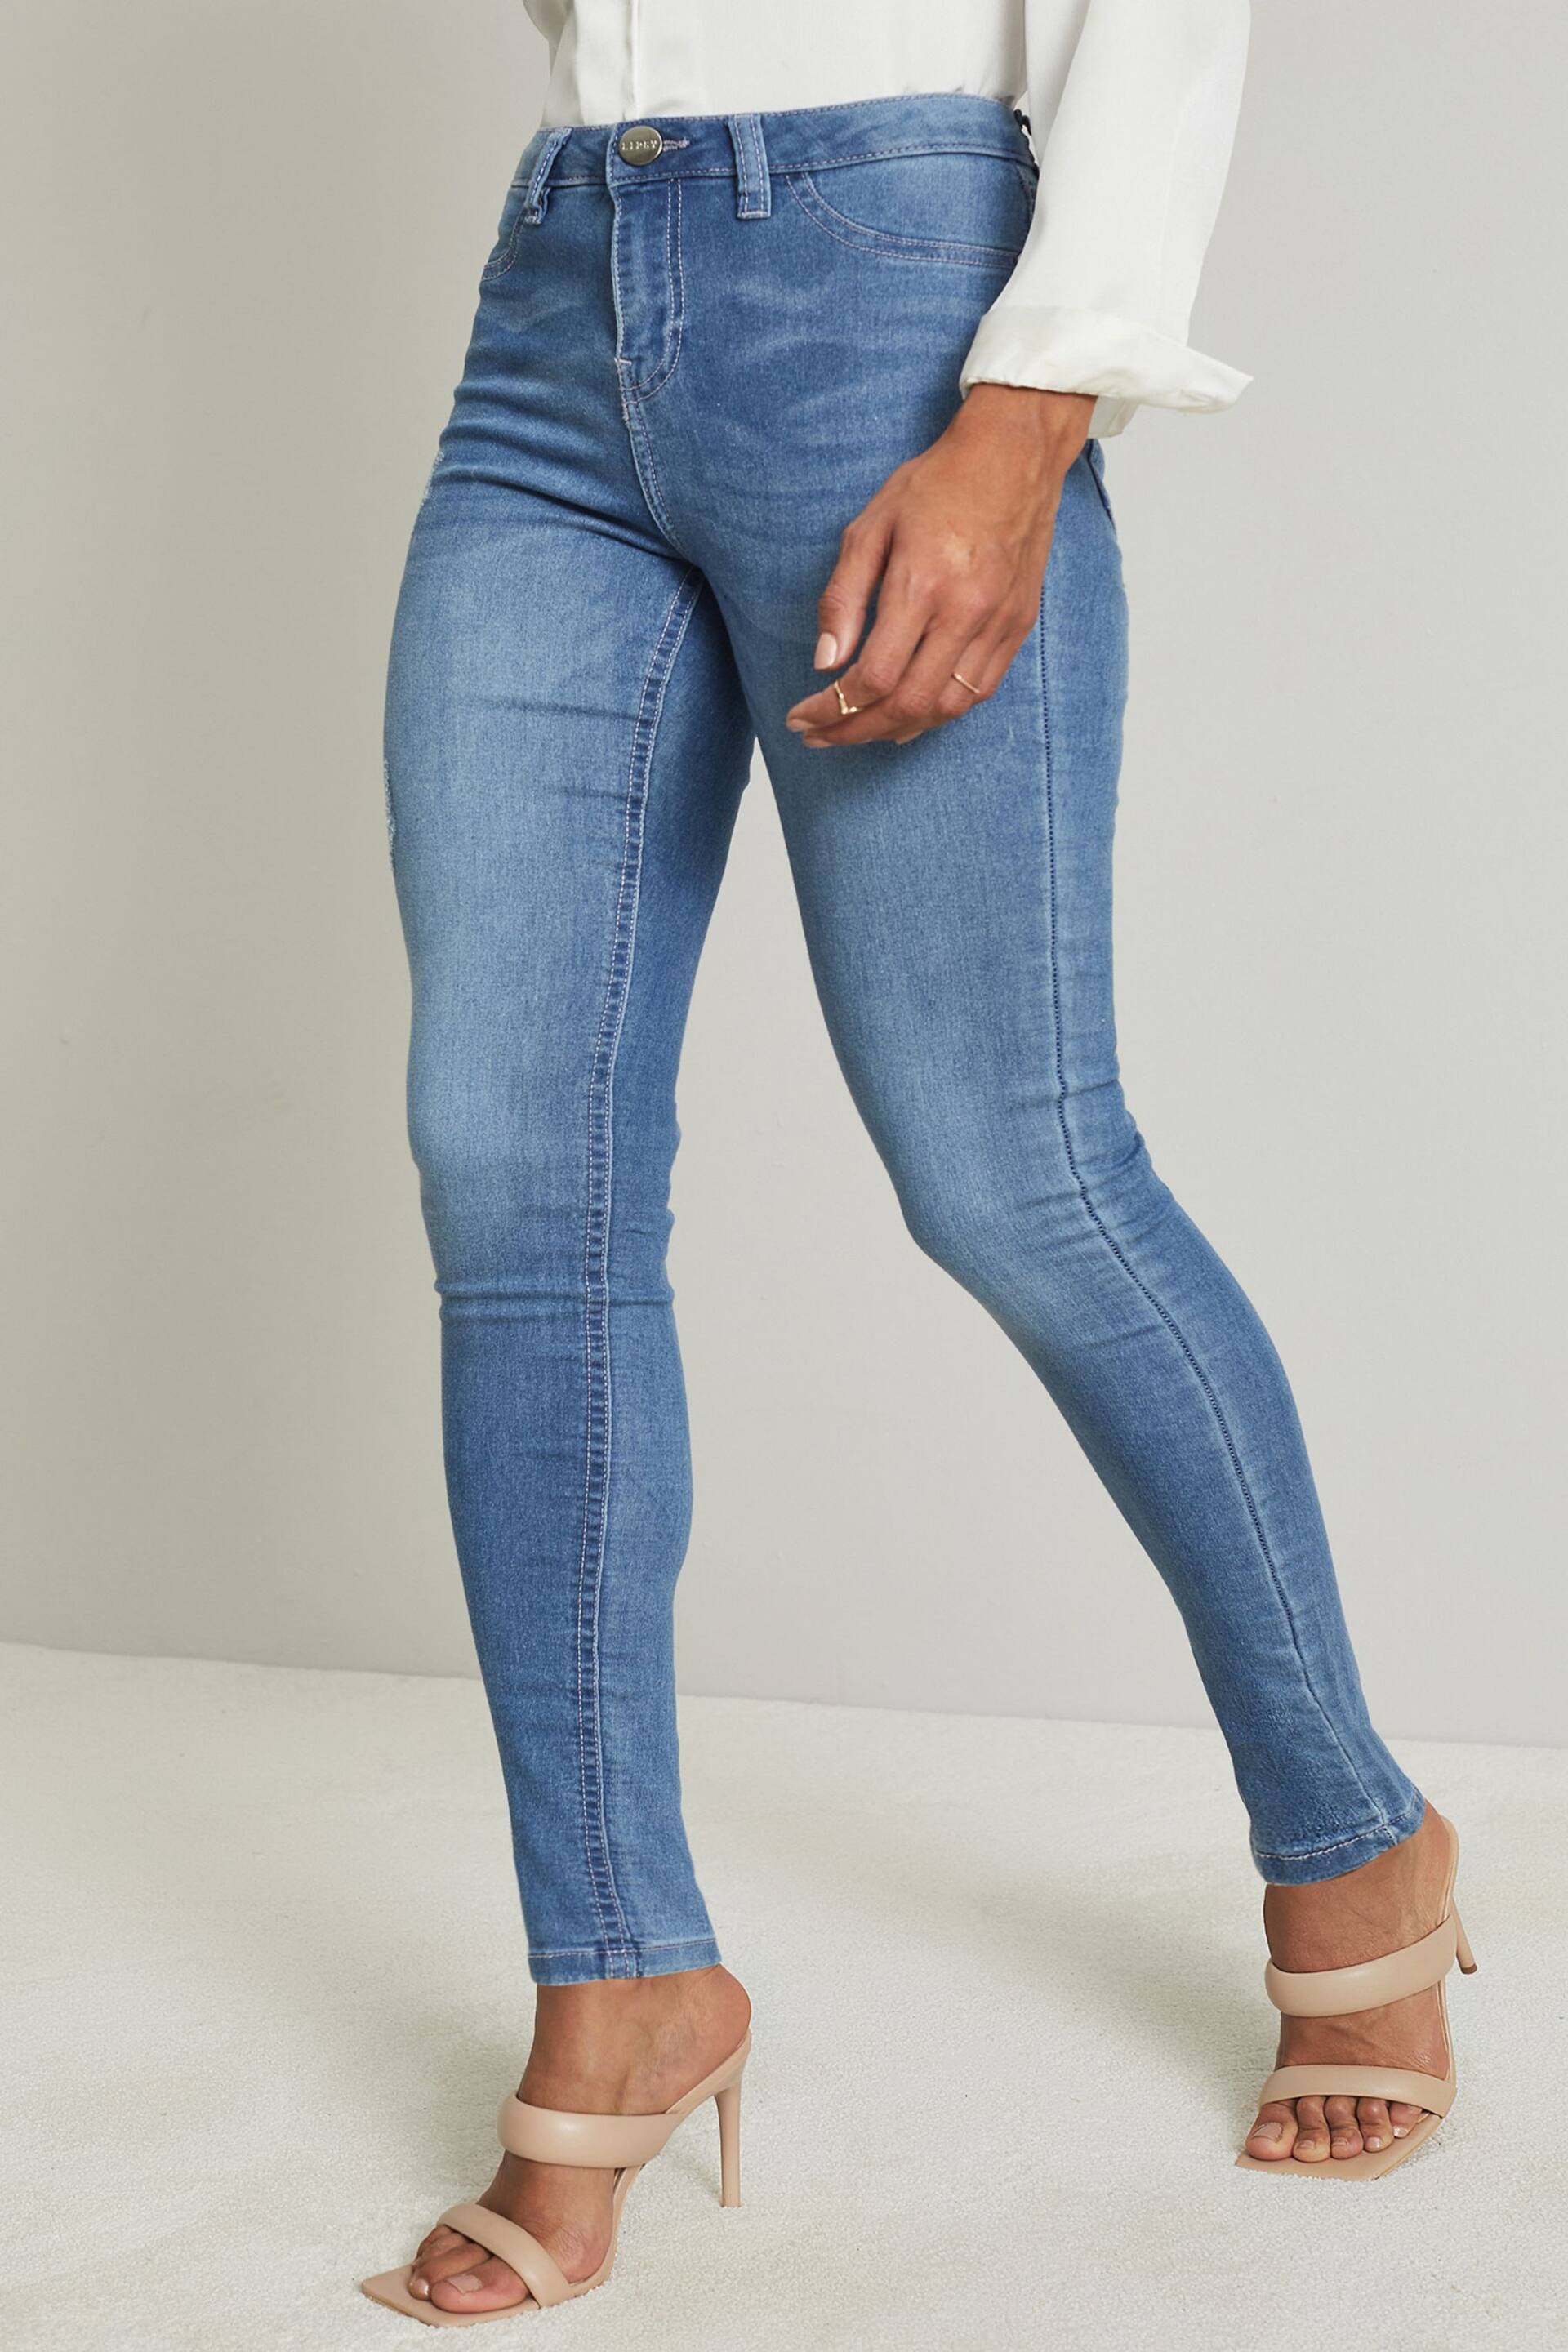 Lipsy Blue Petite Mid Rise Stretch Skinny Jeans - Image 4 of 4